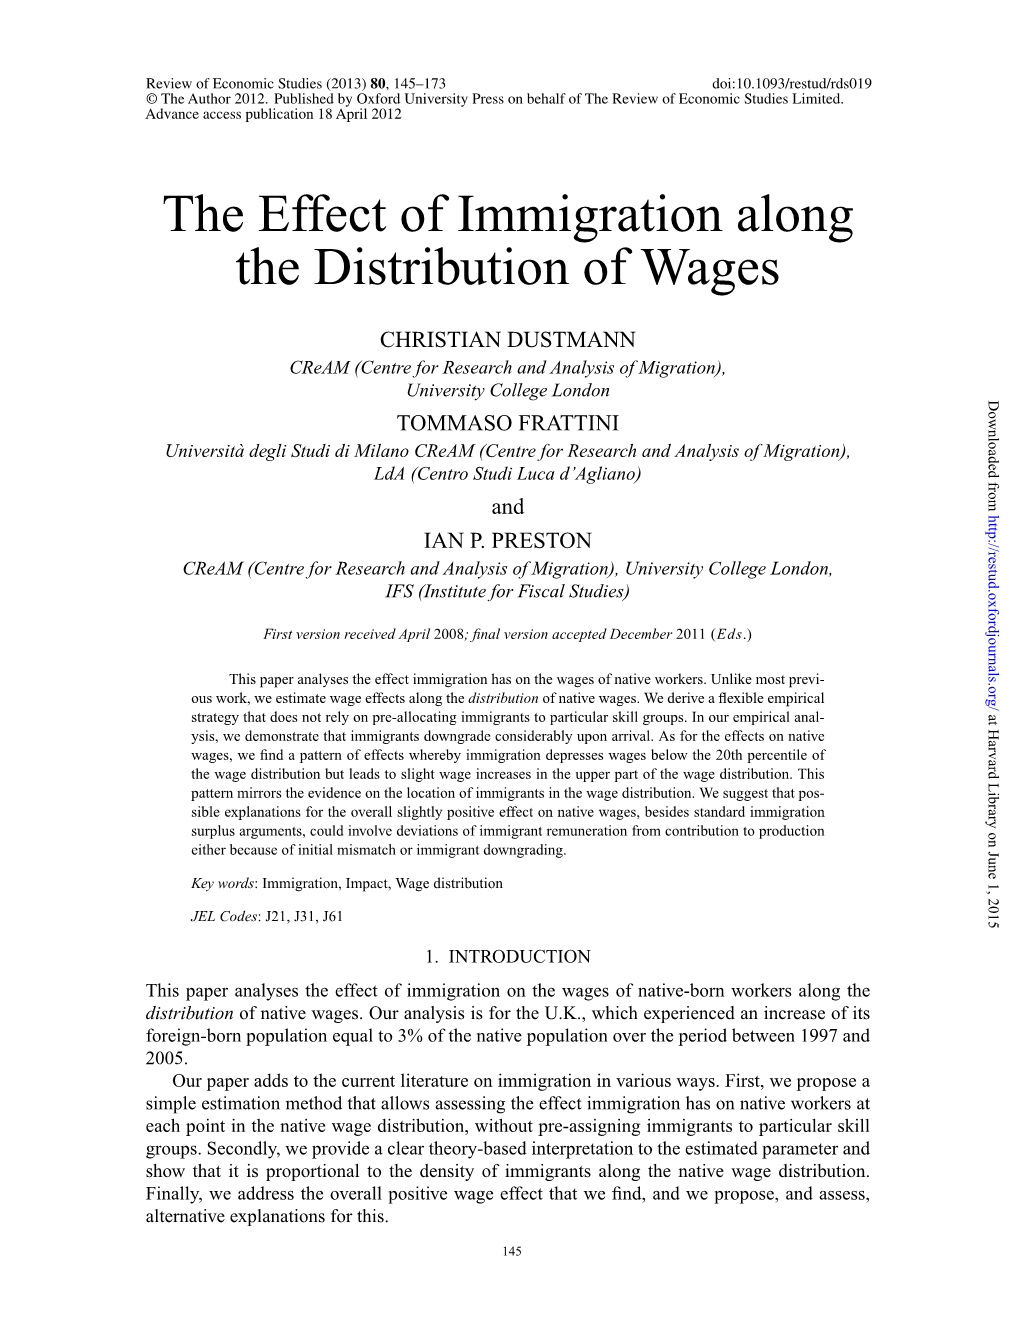 The Effect of Immigration Along the Distribution of Wages